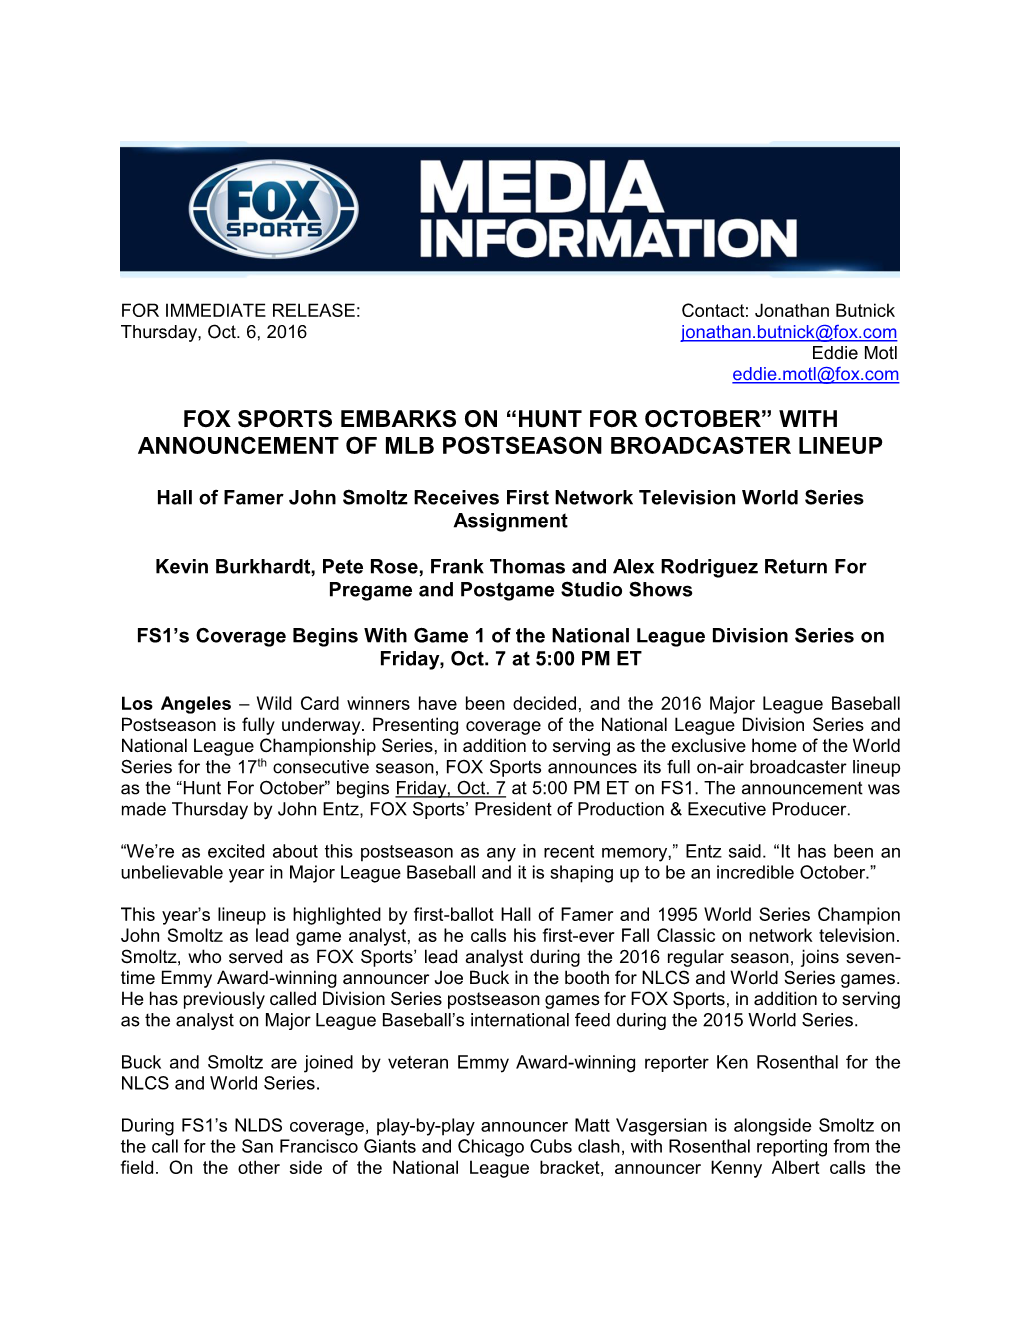 With Announcement of Mlb Postseason Broadcaster Lineup